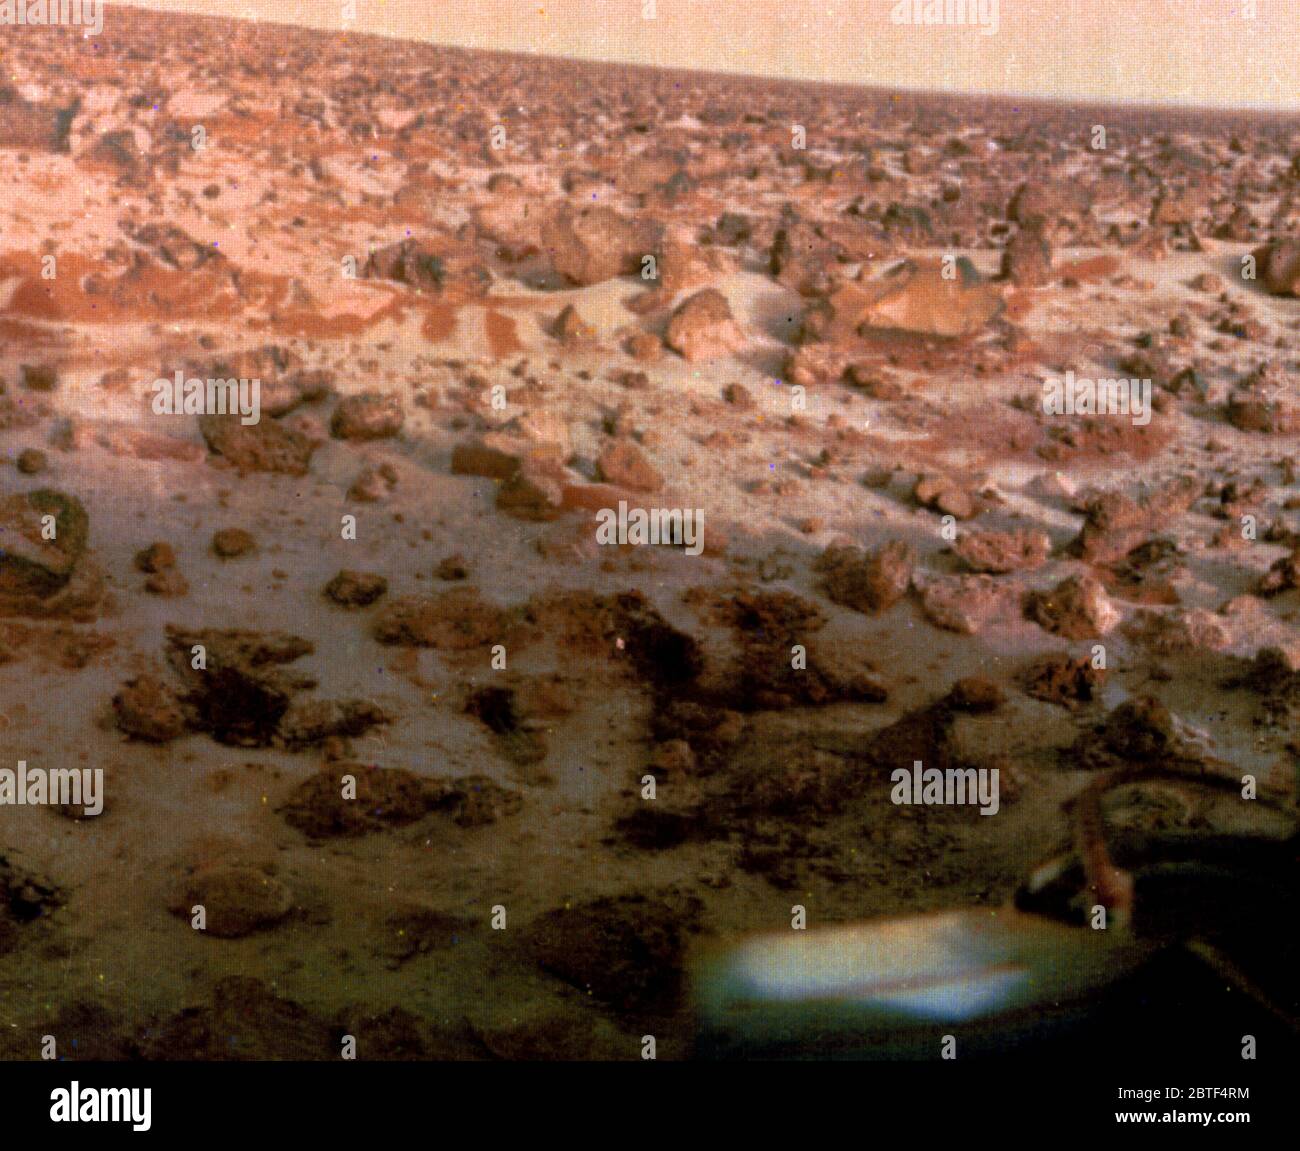 View of ice on Martian surface at Utopia Planitia, Landing Site of Viking 2. The Viking 2 Lander took this photo on May 18, 1979, and relayed it to Earth via the Viking Orbiter 1 on June 07, 1979. Stock Photo